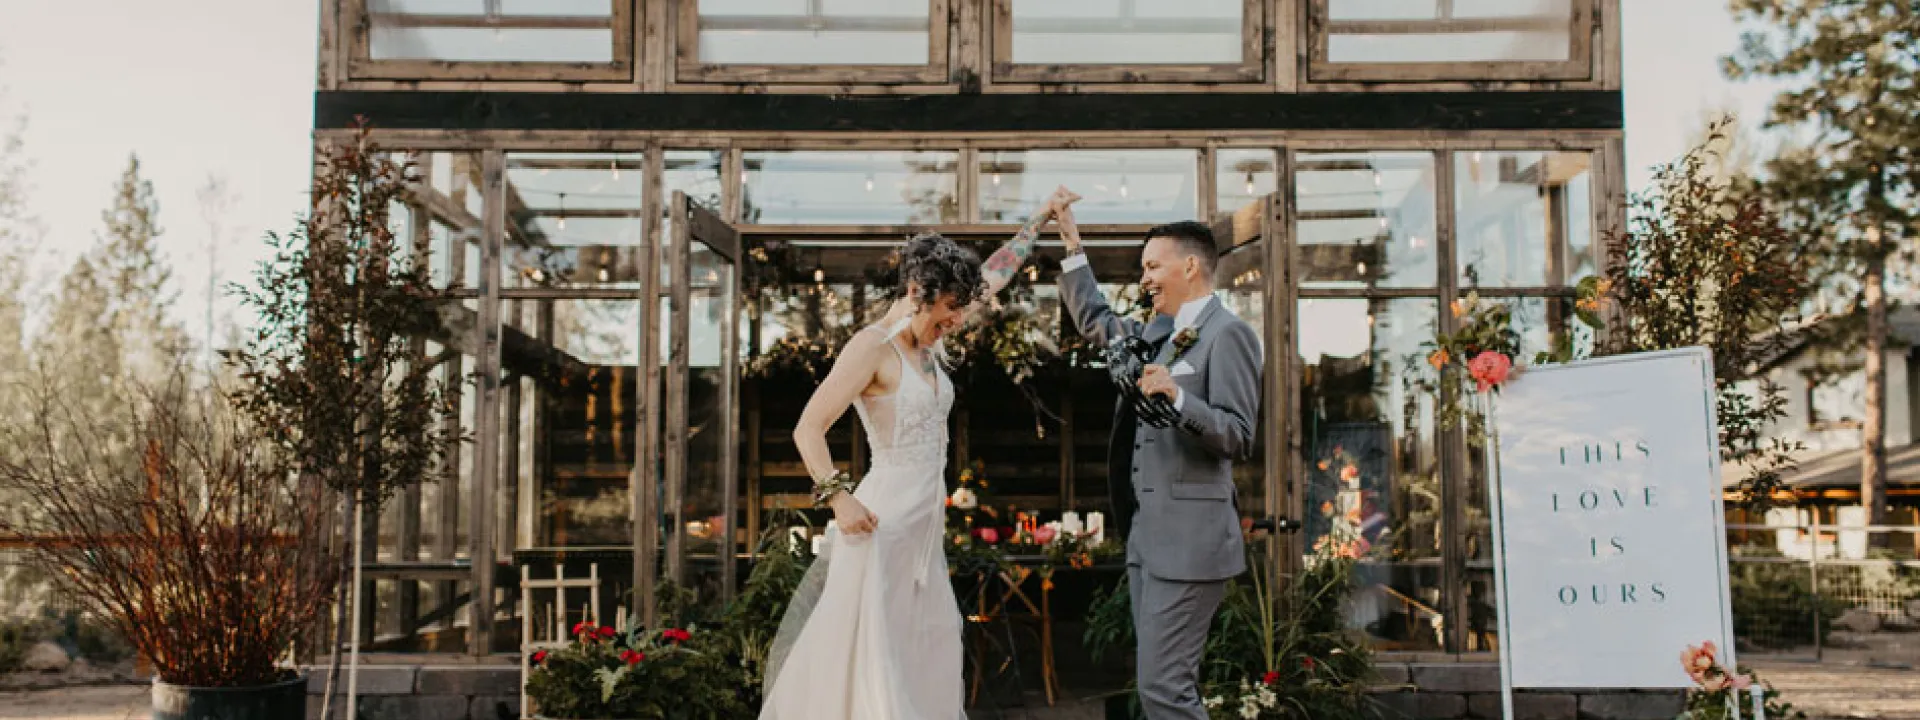 The couple stands outside a greenhouse overflowing with local blooms.